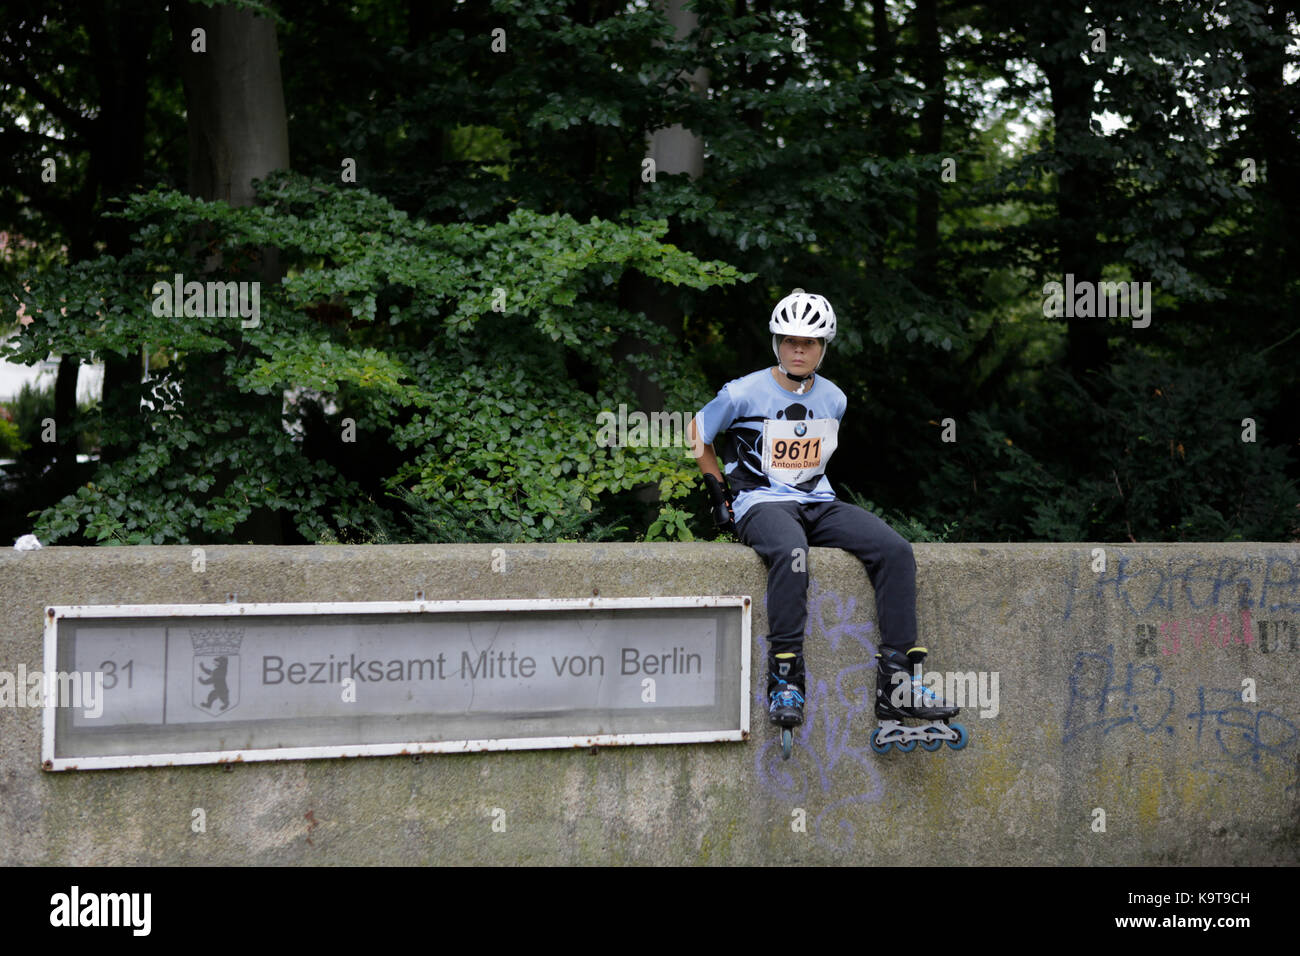 Berlin, Germany. 23rd Sep, 2017. A skater sits on a wall, waiting to get into the starting blocks for the race. Over 5,500 skater took part in the 2017 BMW Berlin Marathon Inline skating race, a day ahead of the Marathon race. Bart Swings from Belgium won the race in 58:42 for the 5th year in a row. Credit: Michael Debets/Pacific Press/Alamy Live News Stock Photo